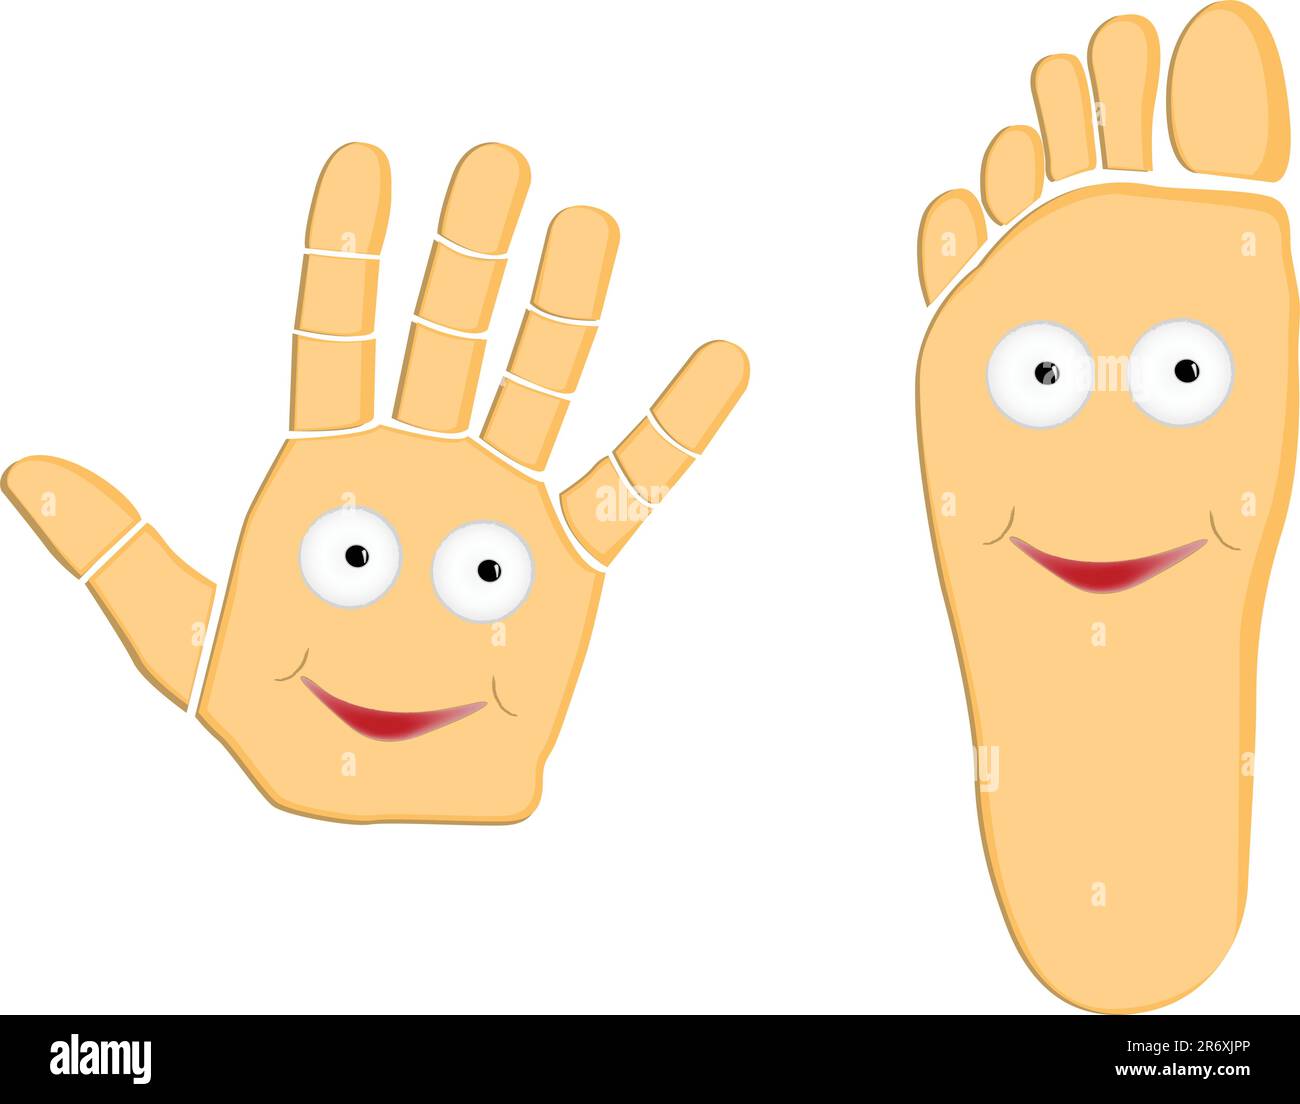 hand and foot vector illustration Stock Vector